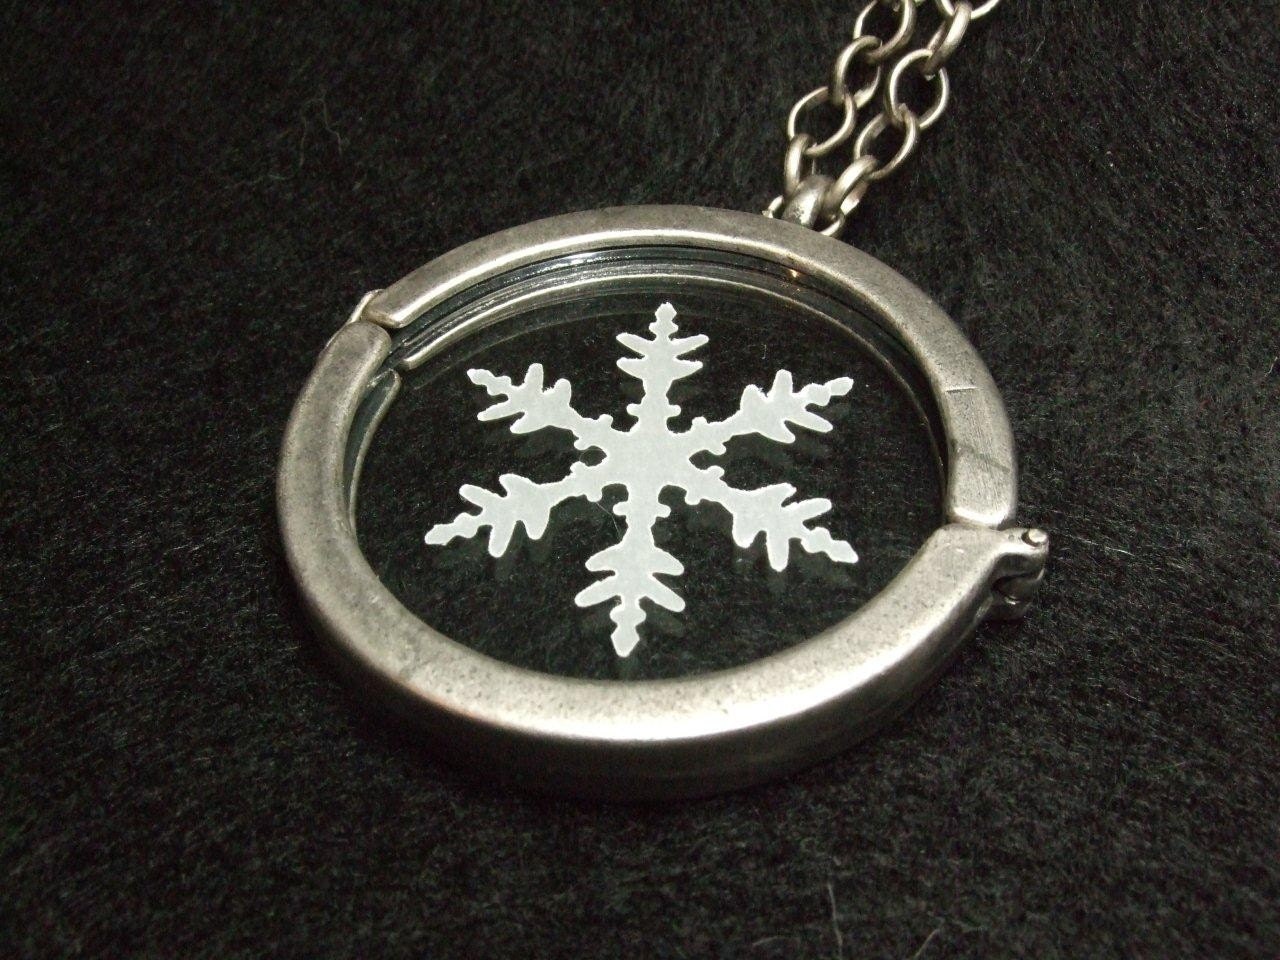 Locket - Glass - Double Sided - Silver - Filled - Snowflake - White - Vintage - Keepsake - Necklace - Captured Collection